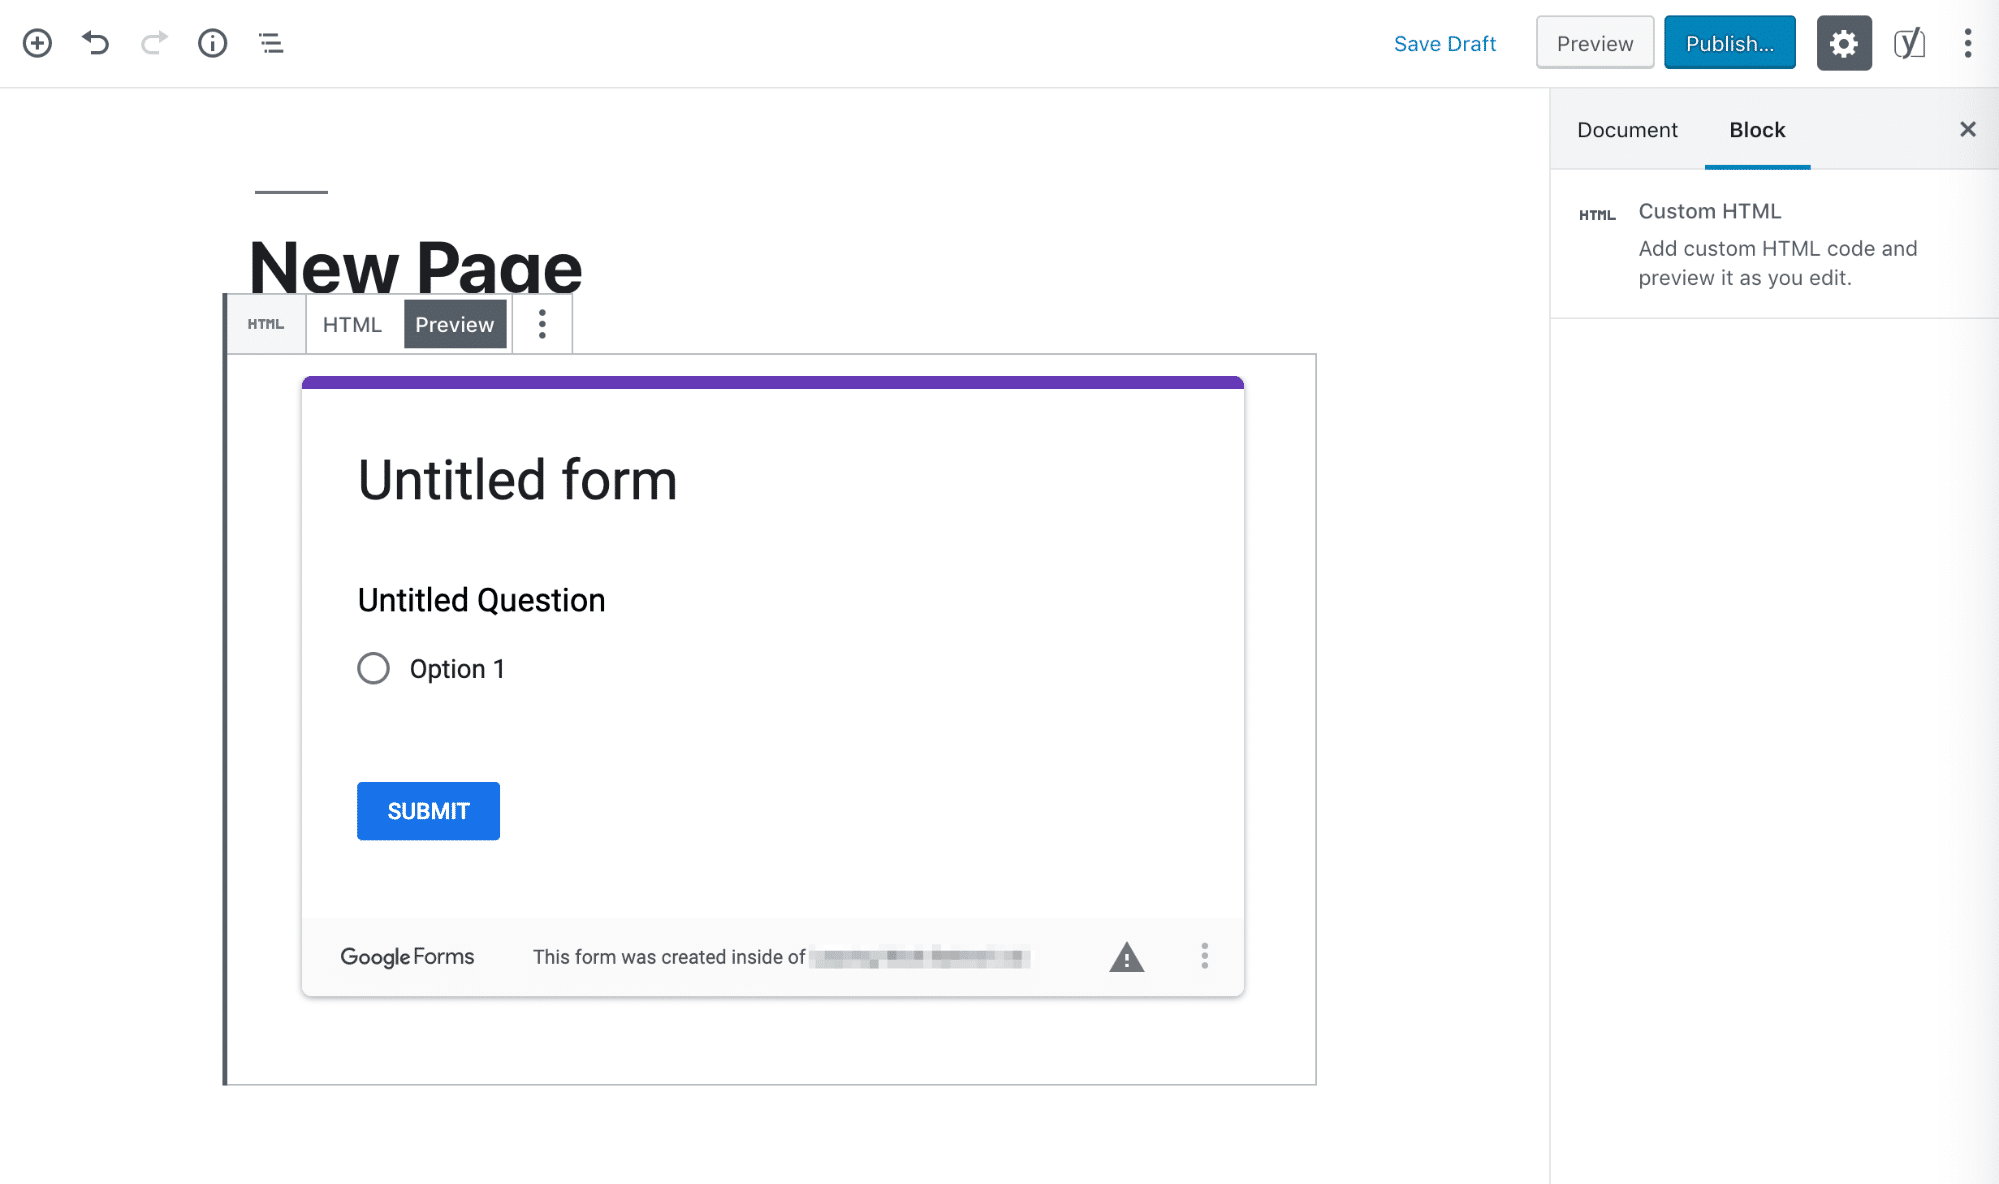 Preview your embedded Google Form in the block editor